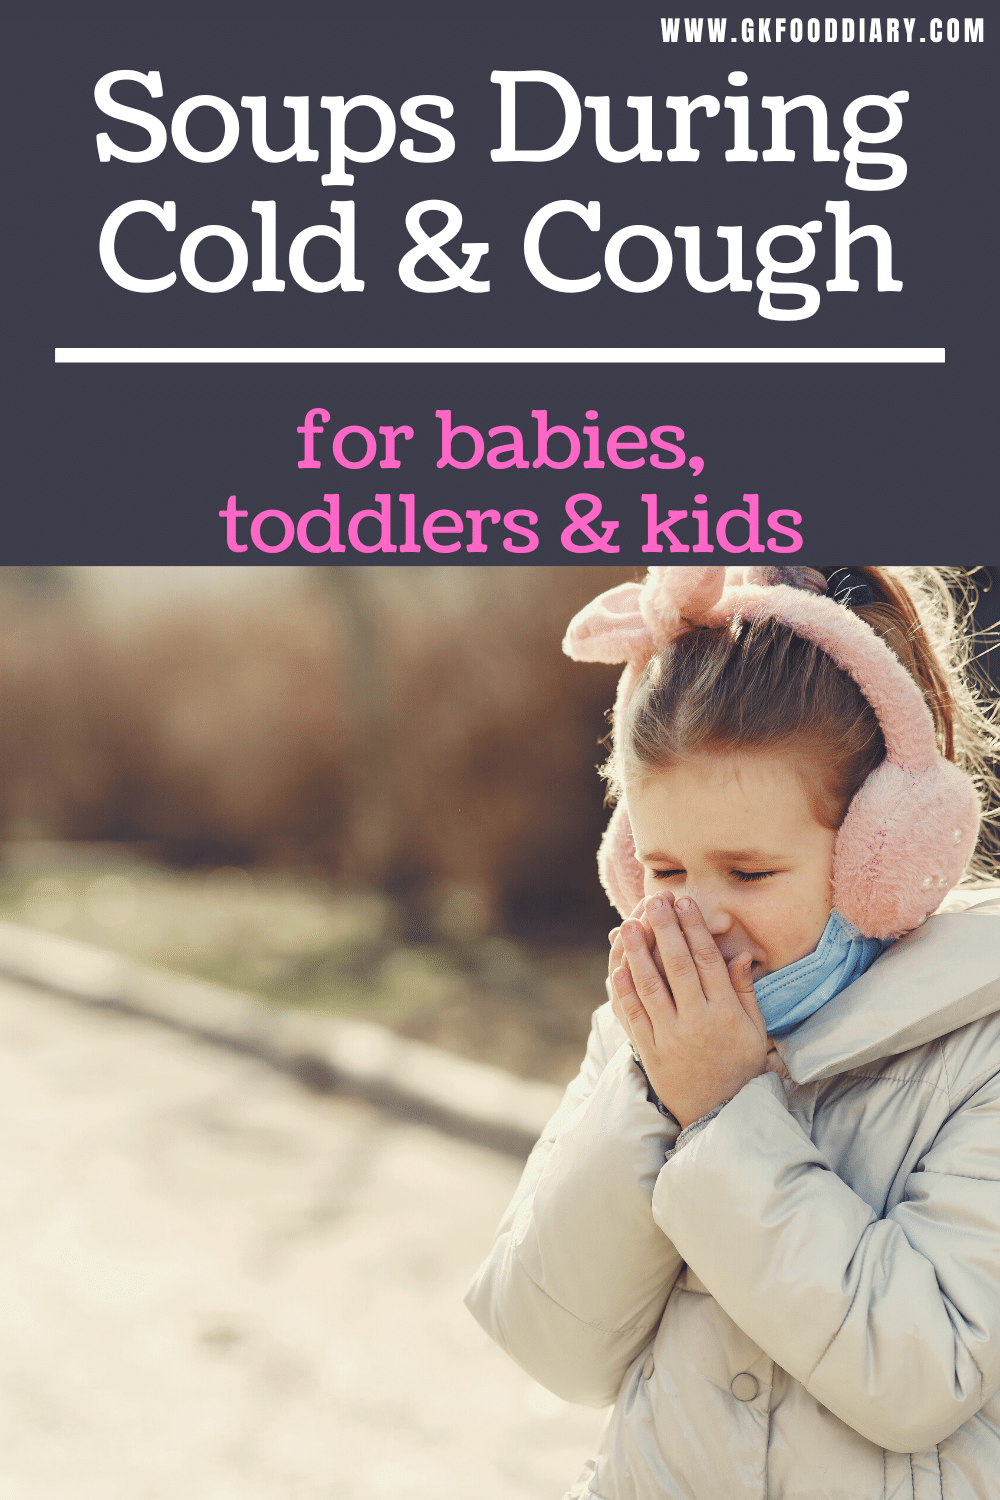 Best Soups During Cold & Cough for Babies, Toddlers & kids